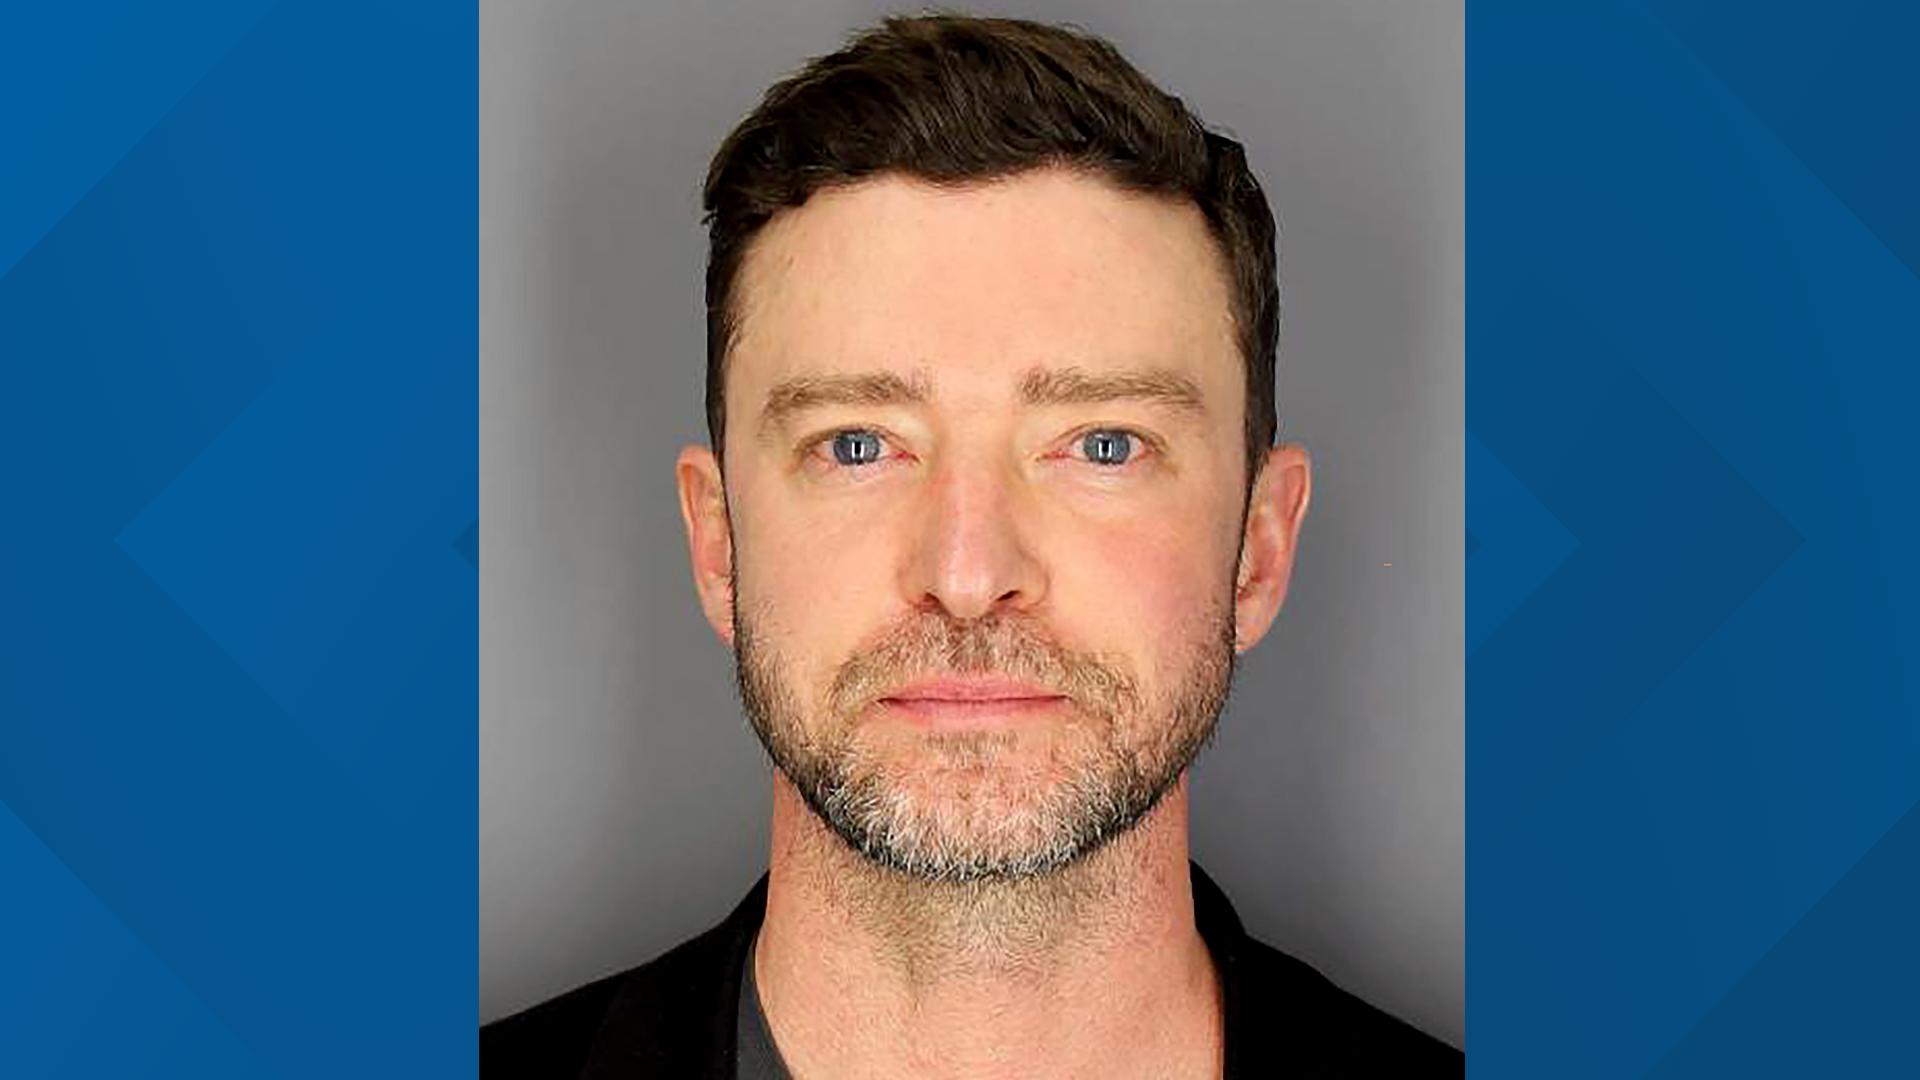 Timberlake was arrested in Sag Harbor, a coastal village in the Hamptons, around 100 miles from New York City.